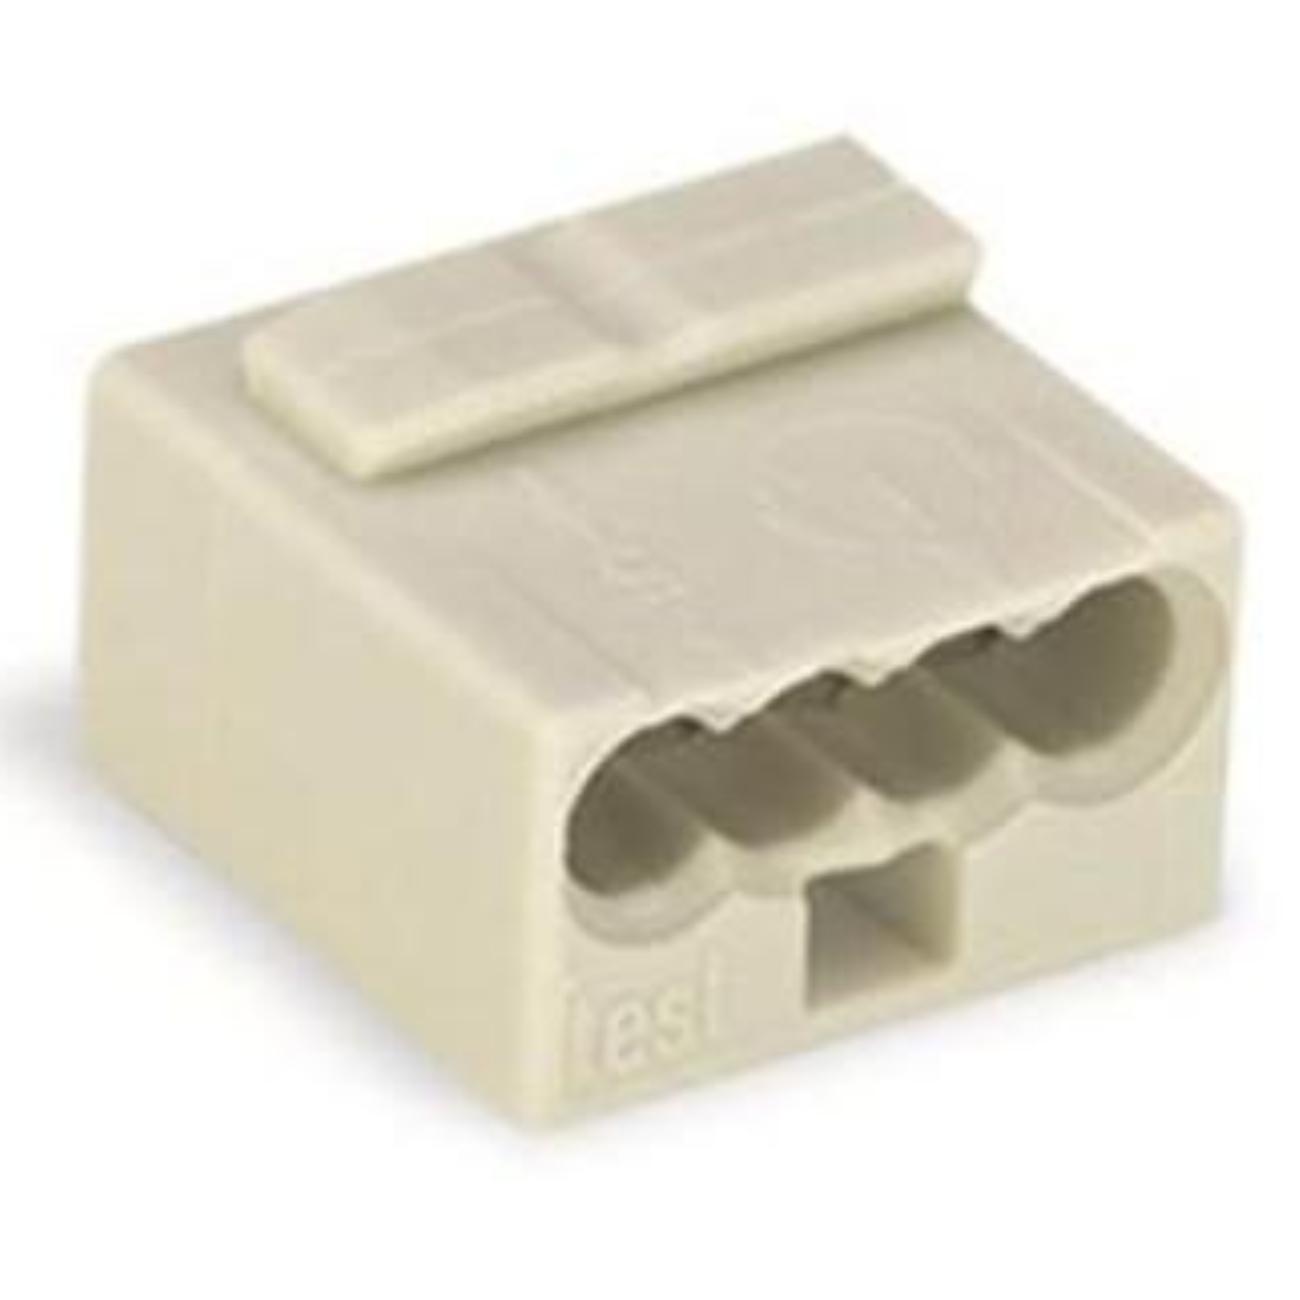 MICRO JUNCTION AND DISTRIBUTION CONNECTORS 4-CONDUCTOR TERMINAL BLOCK - WAGO